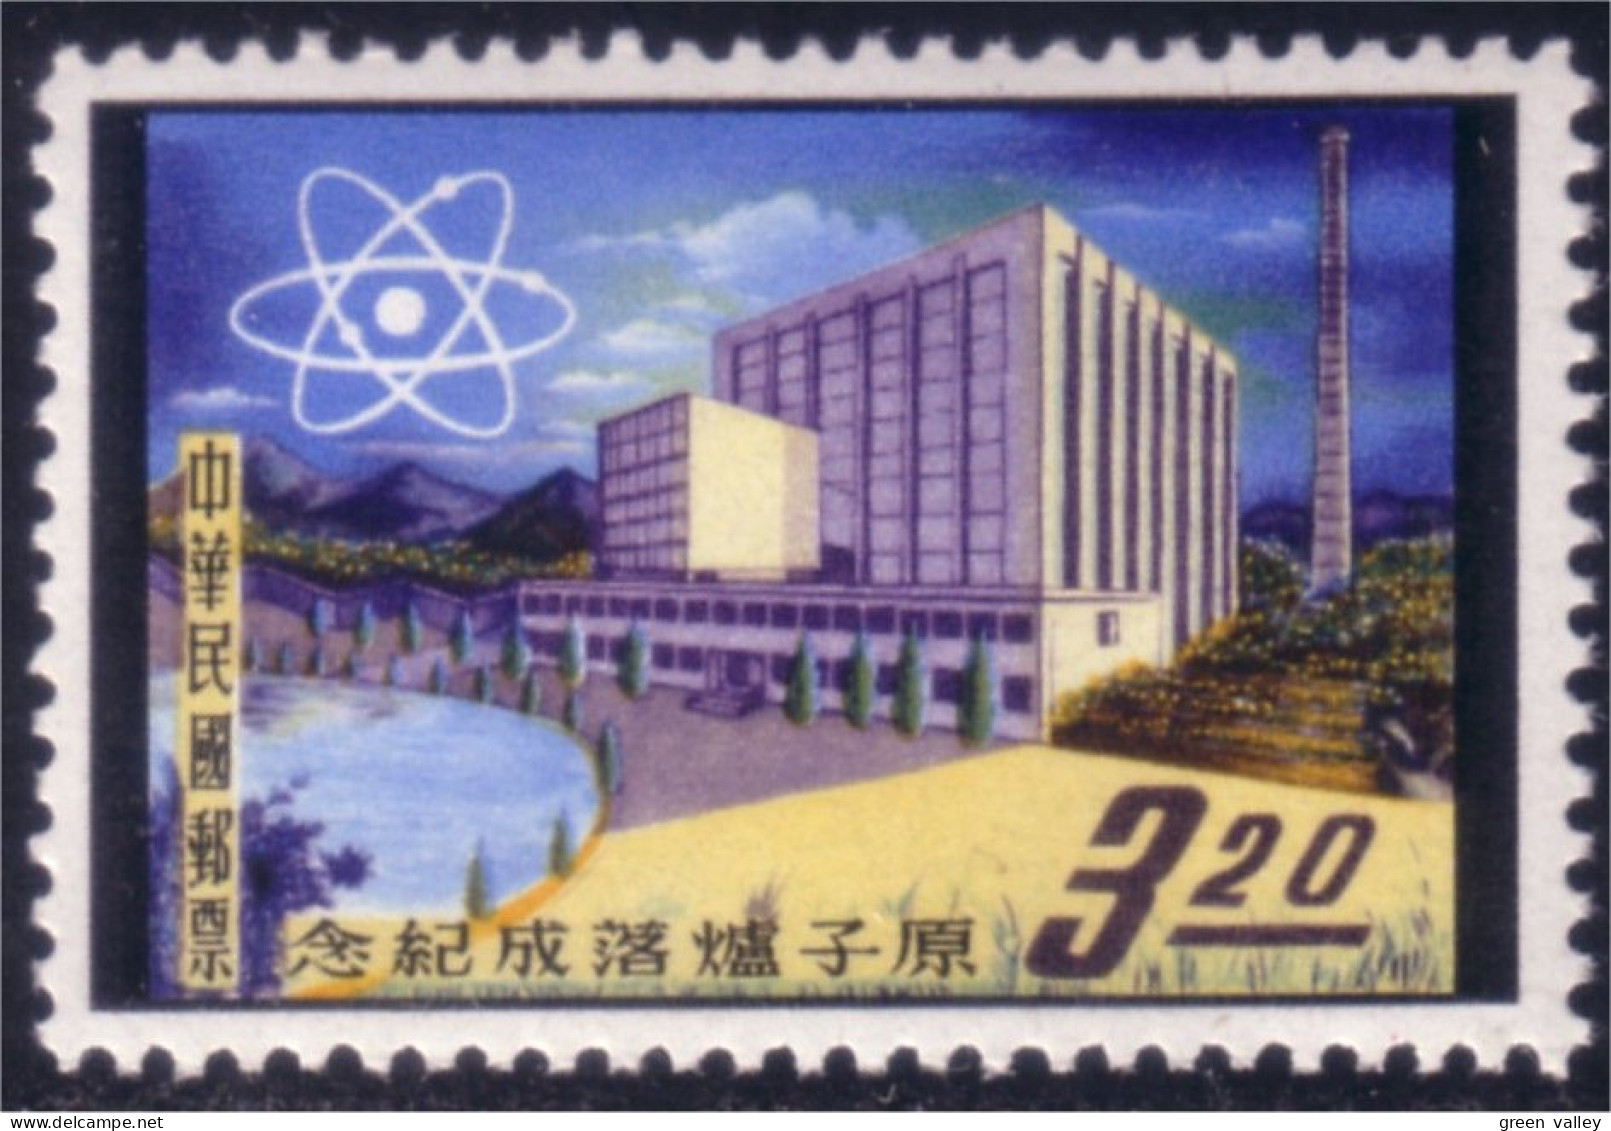 260 China Atome Nuclear Laboratory Nucléaire MNH ** Neuf SC (CHI-146) - Atomo